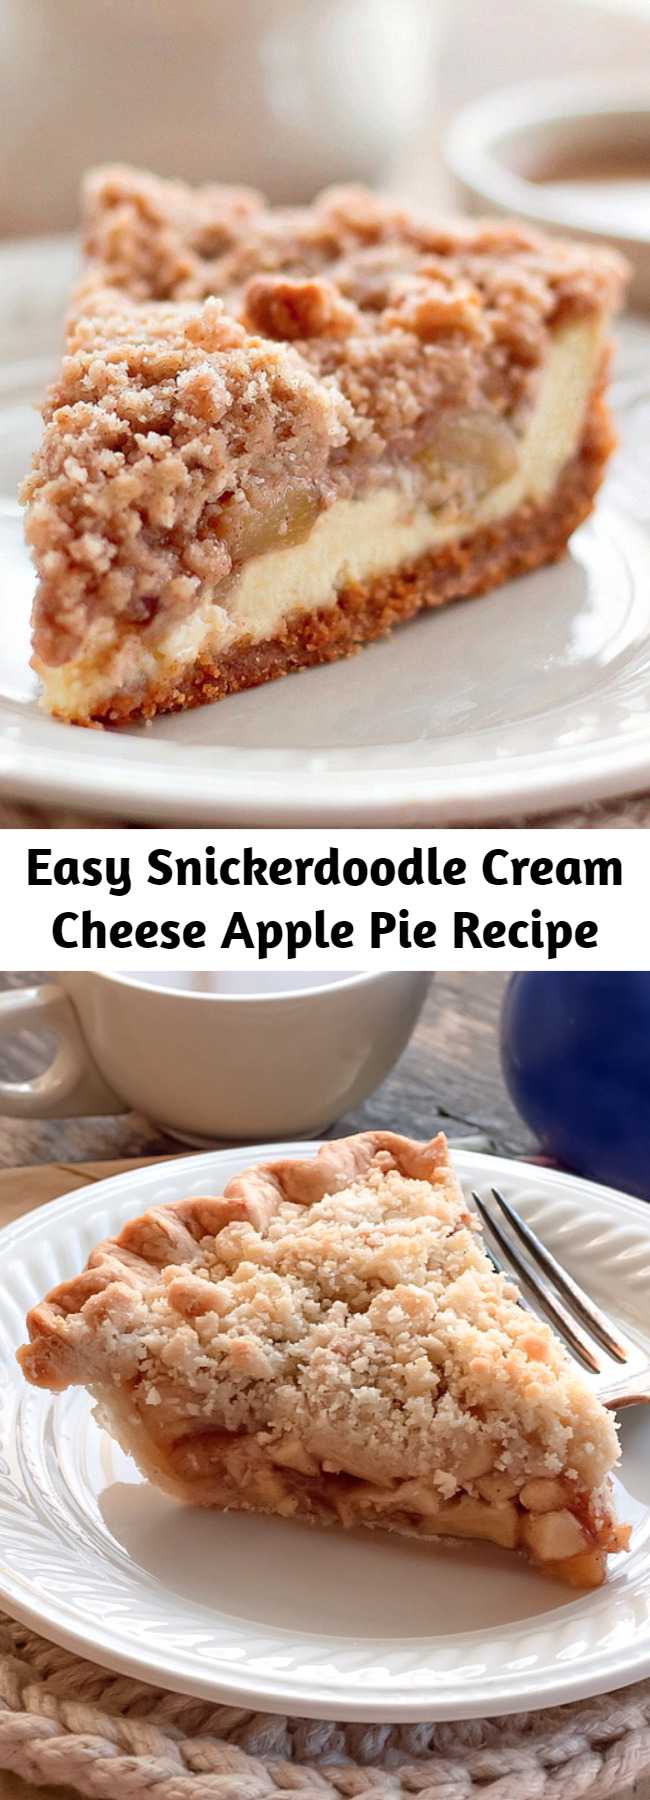 Easy Snickerdoodle Cream Cheese Apple Pie Recipe - Snickerdoodle Cream Cheese Apple Pie is made with a snickerdoodle cookie crust. A layer of cream cheese, chopped apple pie filling and a snickerdoodle crumb topping.